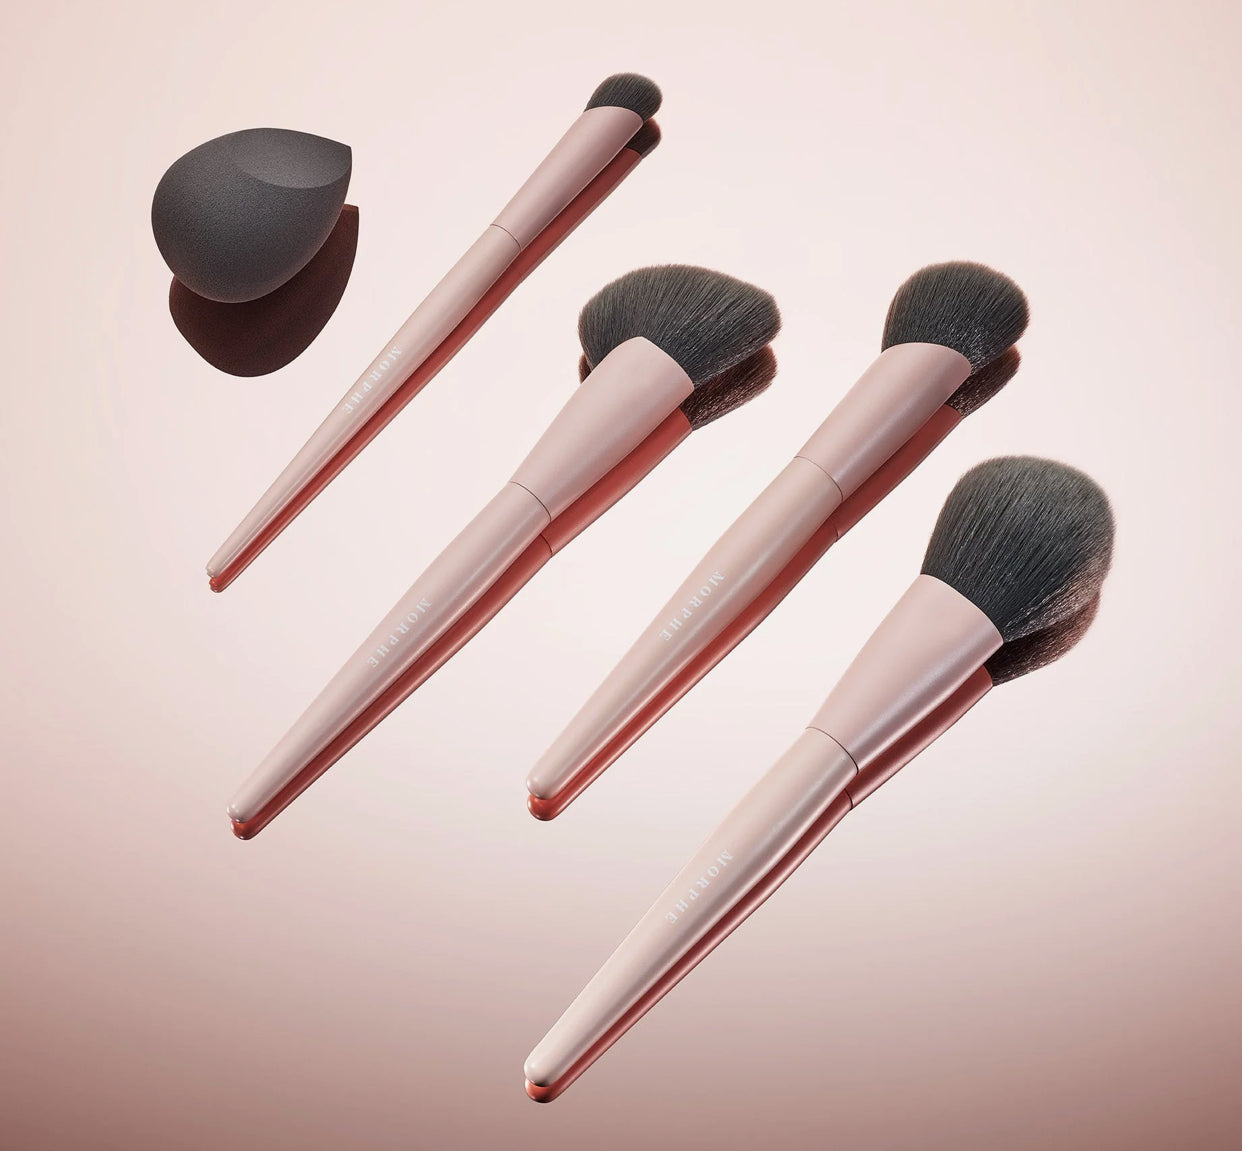 MORPHE, Face Shaping Essentials Bamboo & Charcoal Infused Face Brush Set